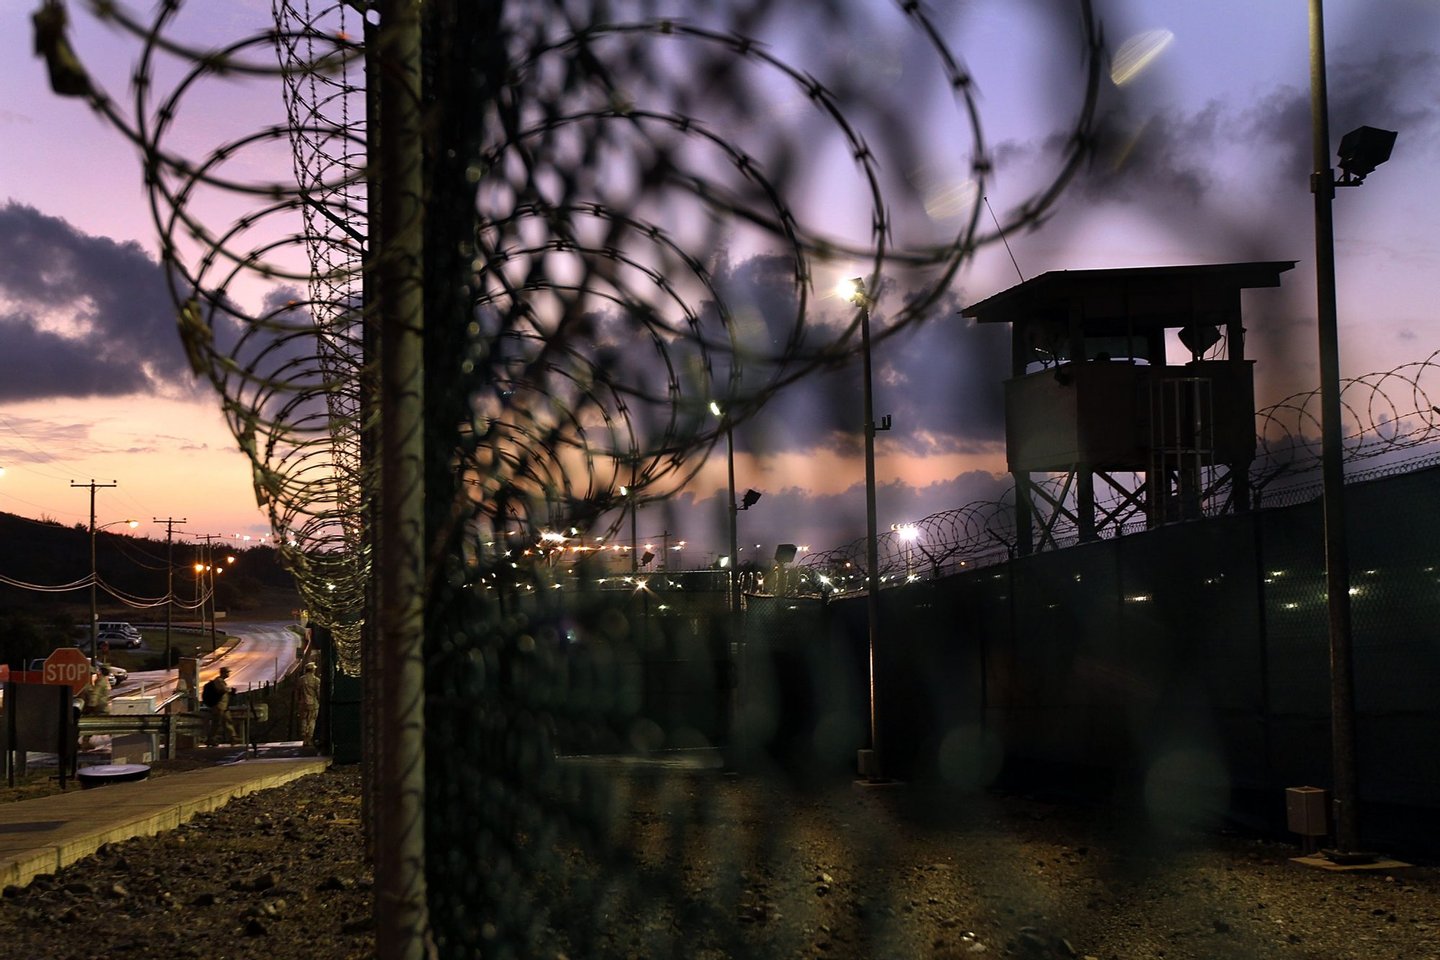 GUANTANAMO BAY, CUBA - MARCH 30: (EDITORS NOTE: Image has been reviewed by the U.S. Military prior to transmission.) A U.S. military guard arrives for work at Camp Delta in the Guantanamo Bay detention center on March 30, 2010 in Guantanamo Bay, Cuba. U.S. President Barack Obama pledged to close the prison by early 2010 but has struggled to transfer, try or release the remaining detainees from the facility, located on the U.S. Naval Base at Guantanamo Bay, Cuba. (Photo by John Moore/Getty Images)